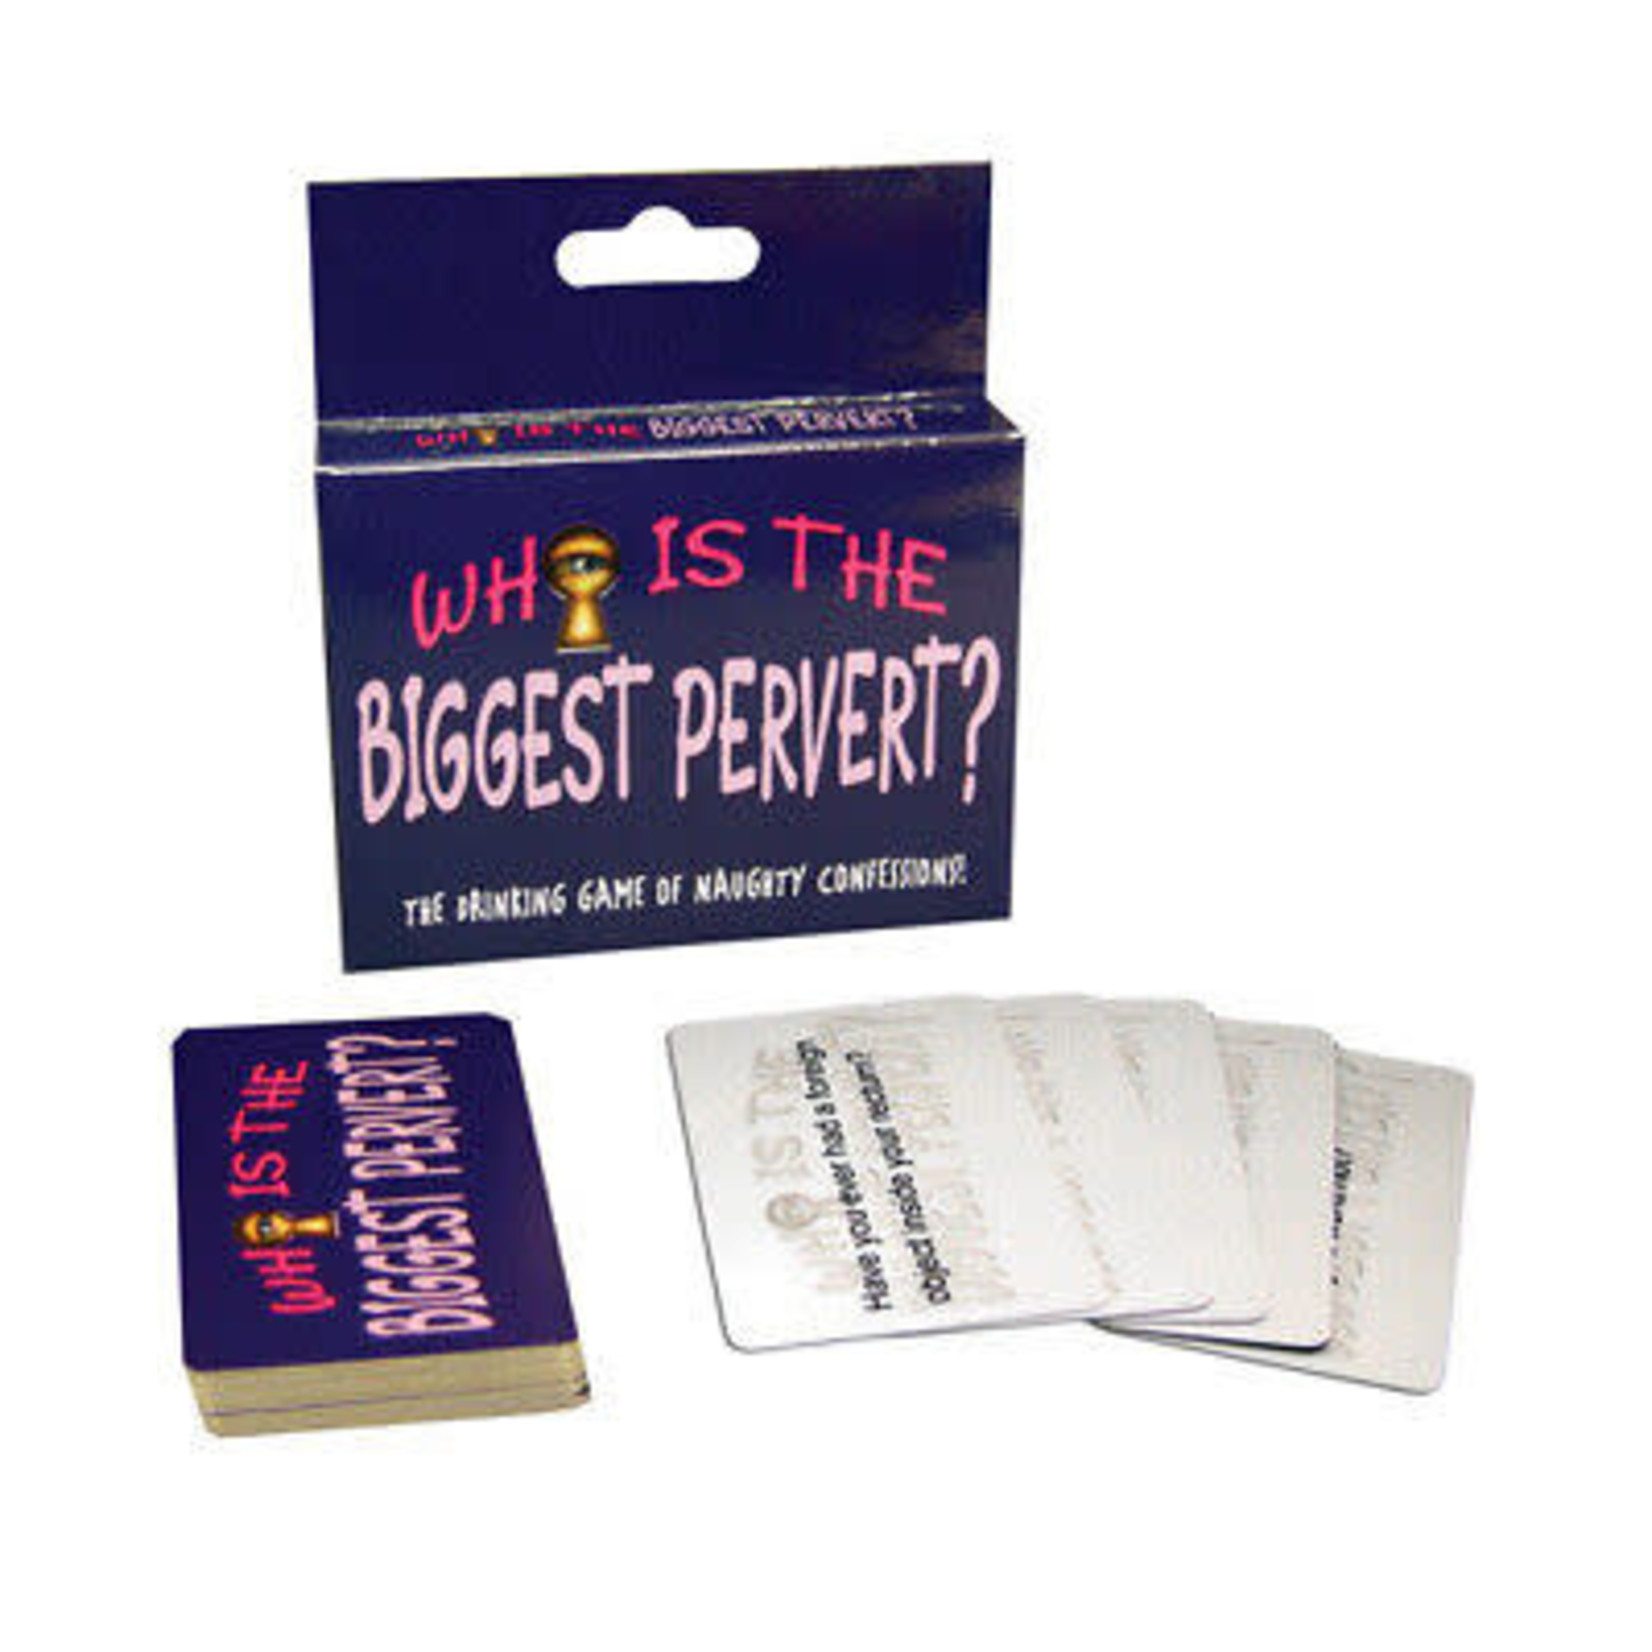 KHEPER GAMES WHO IS THE BIGGEST PERVERT CARD GAME